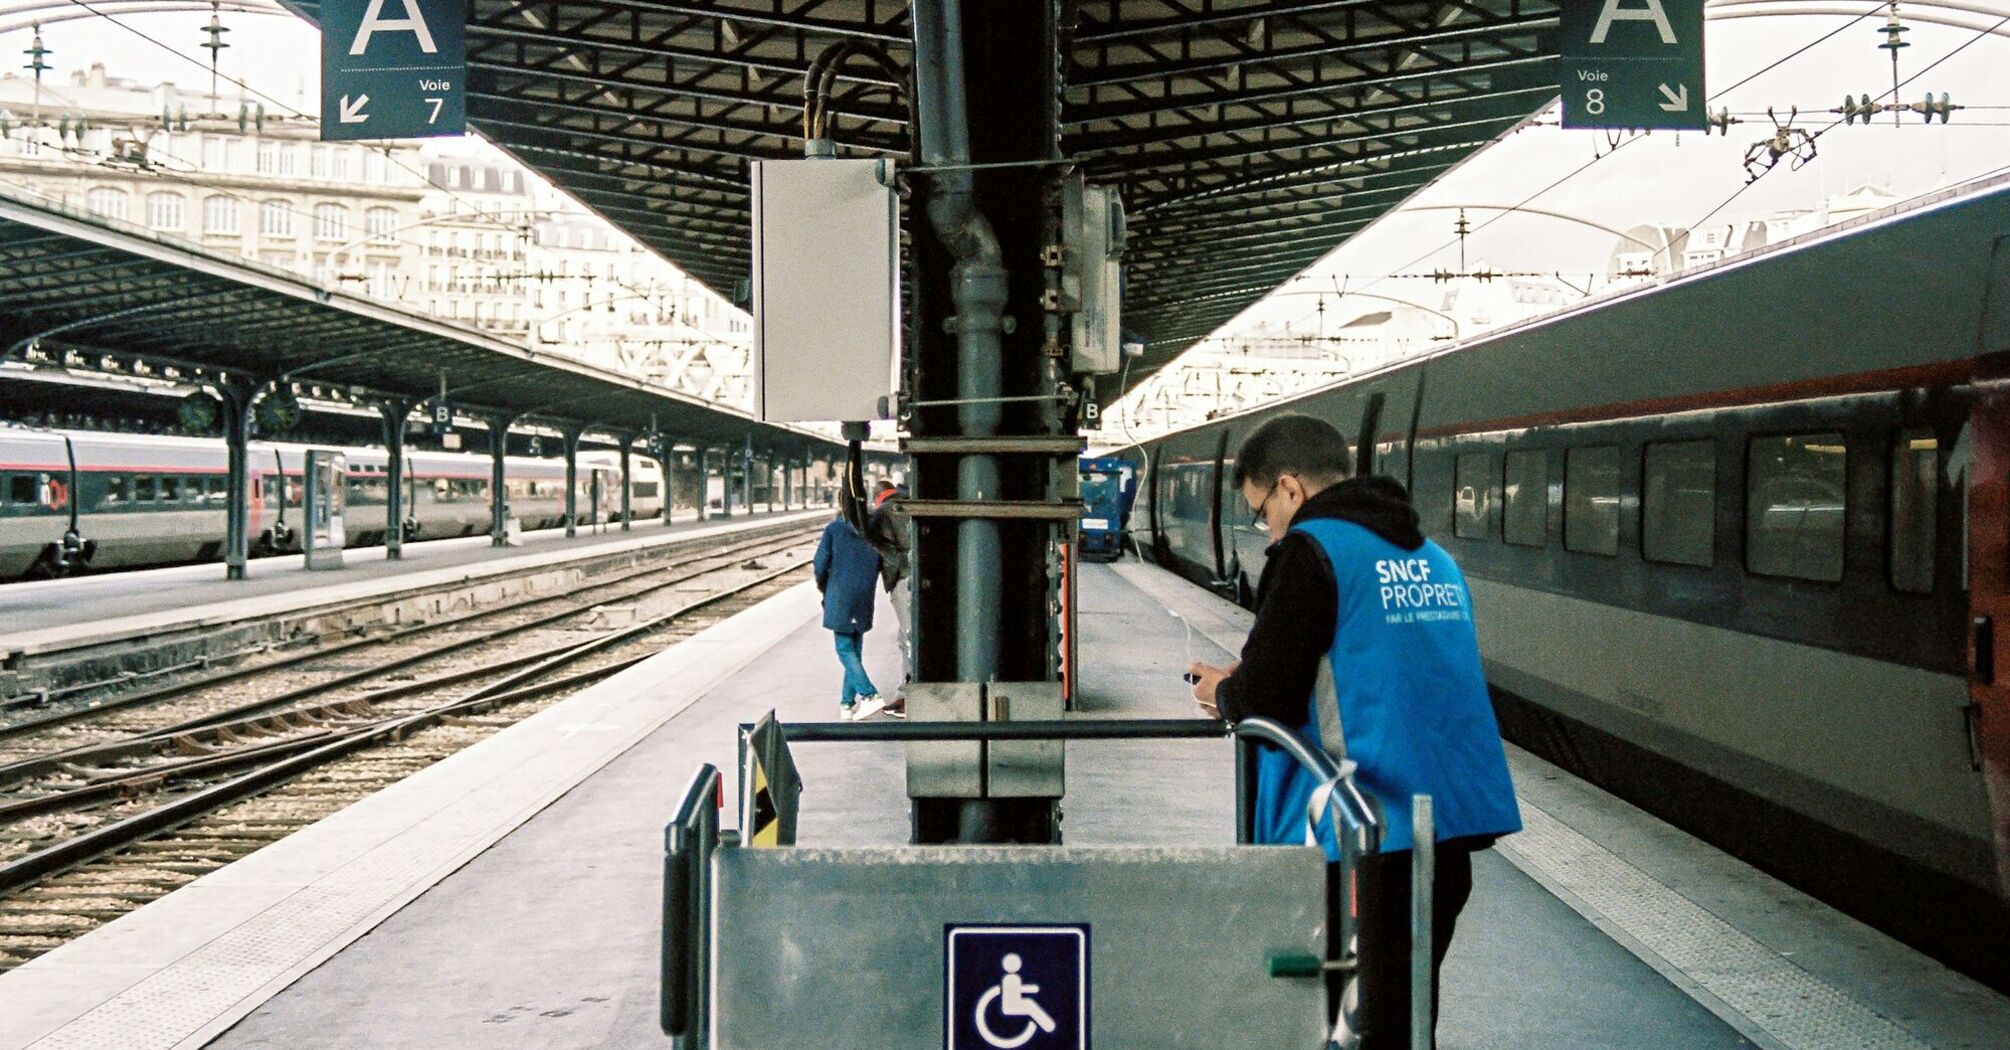 Platform at a French railway station with an SNCF employee